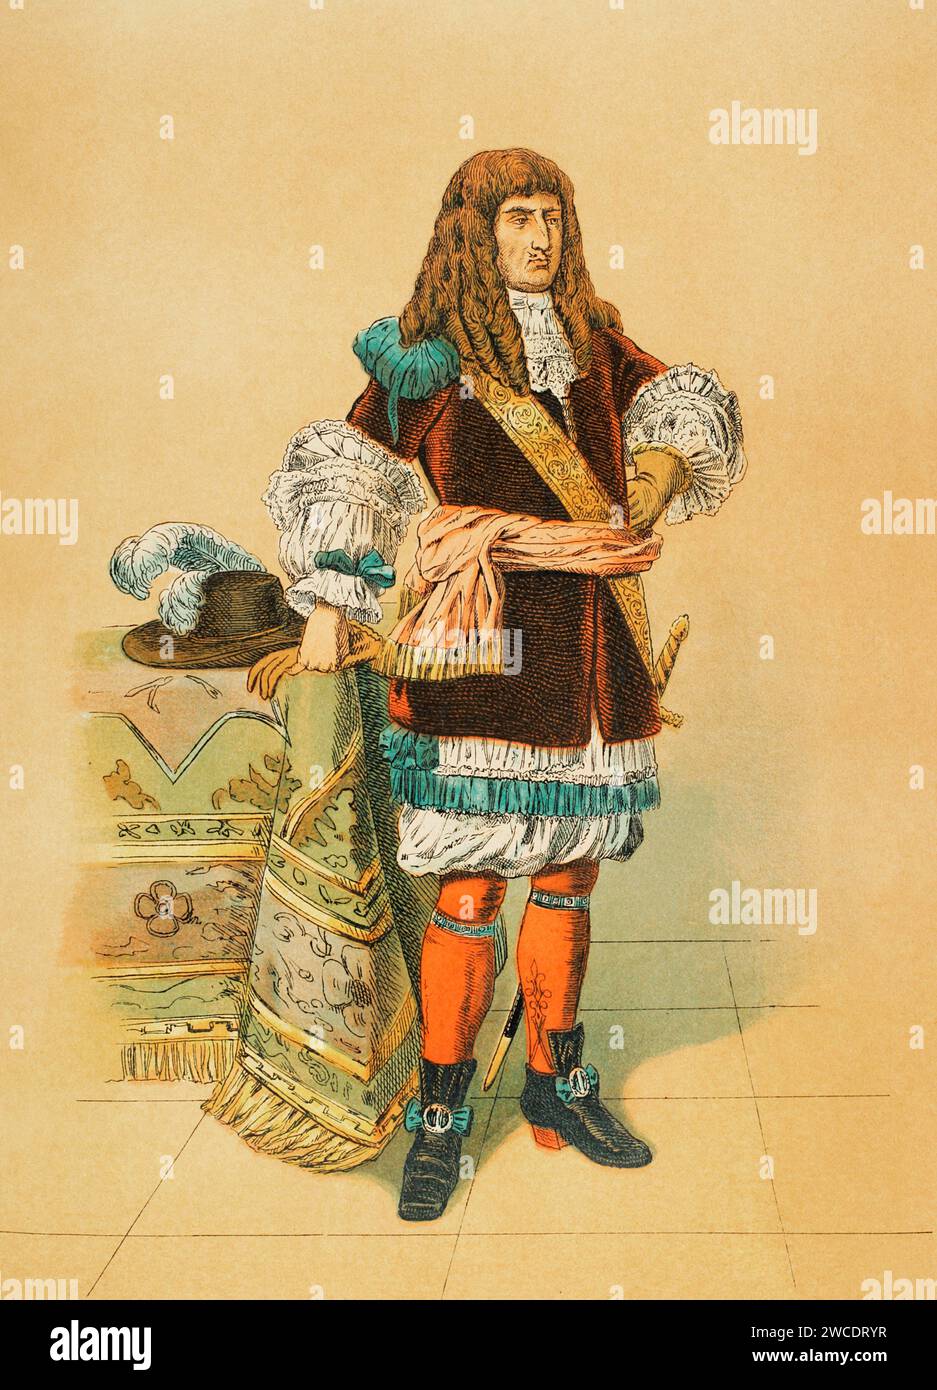 Louis XIV, known as 'the Sun King' (1638-1715). King of France (1643-1715). Portrait. Chromolithography. 'Historia Universal', by César Cantú. Volume VIII, 1881. Stock Photo